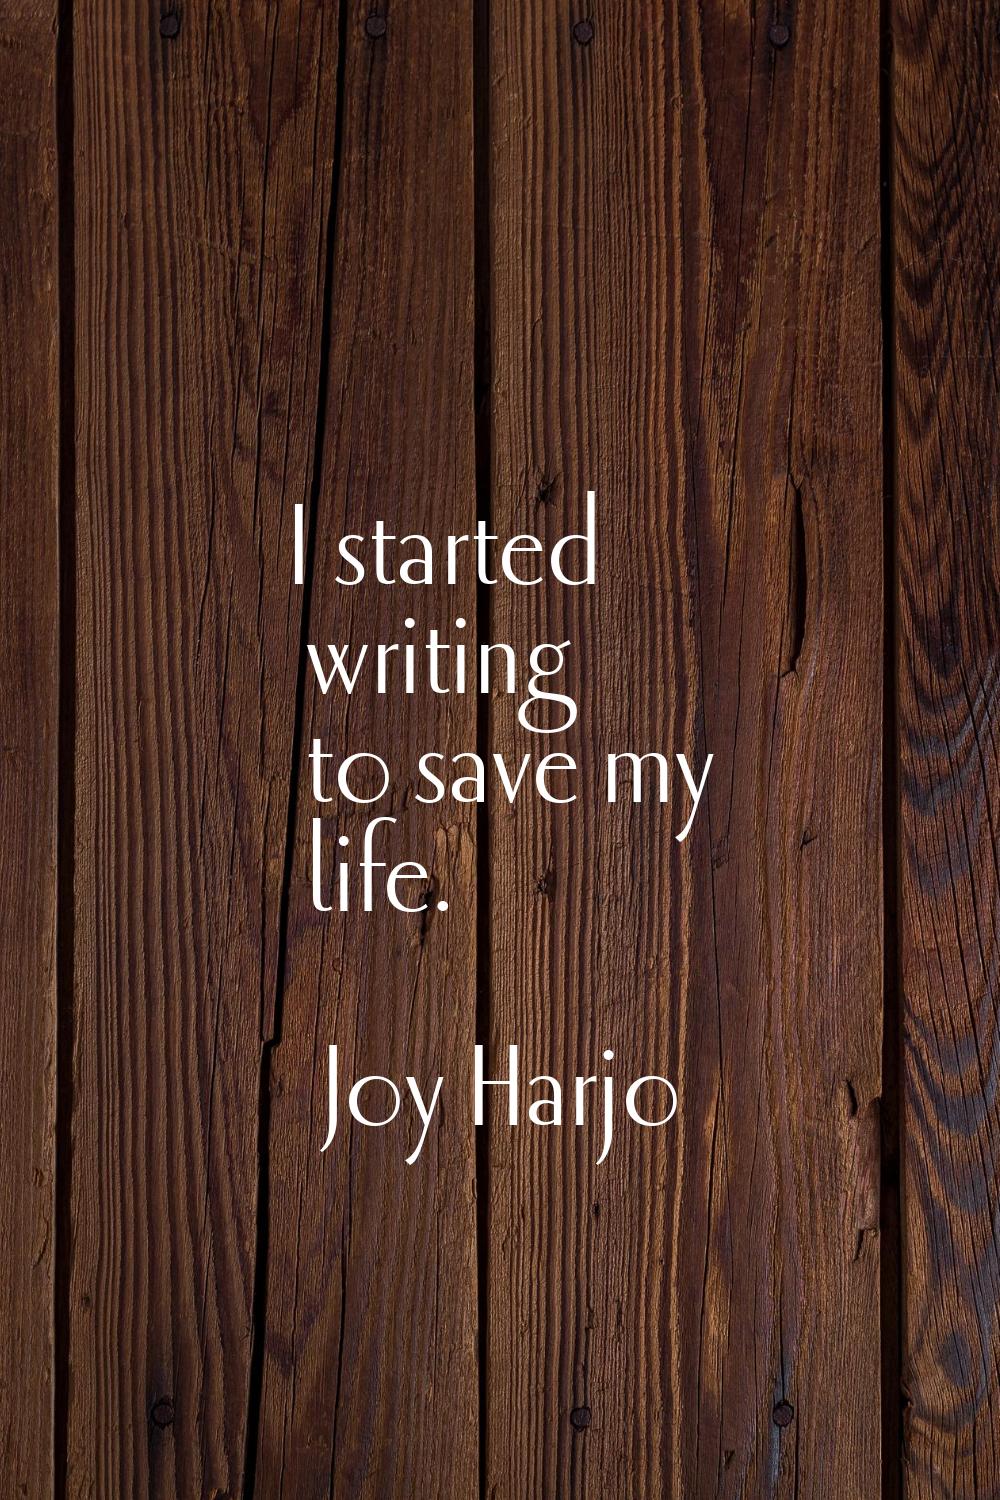 I started writing to save my life.